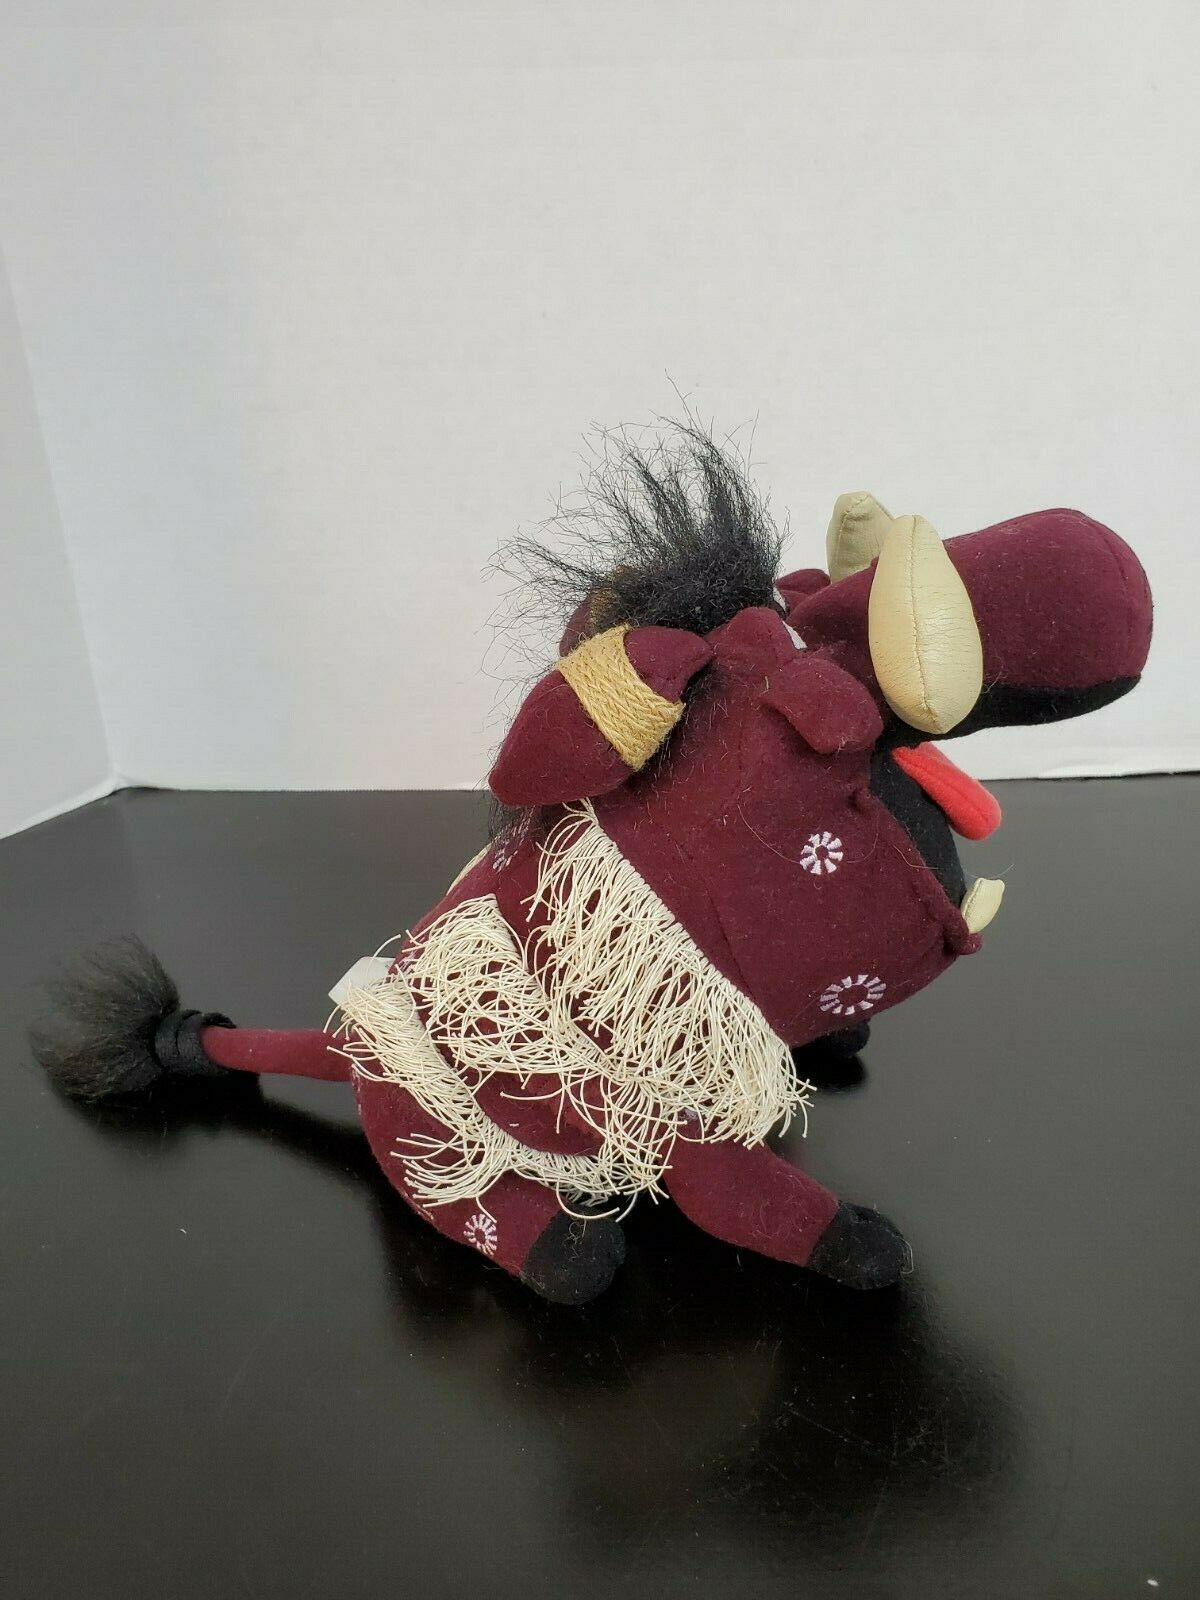 Primary image for Disney's Pumbaa from The Lion King on Broadway Plush